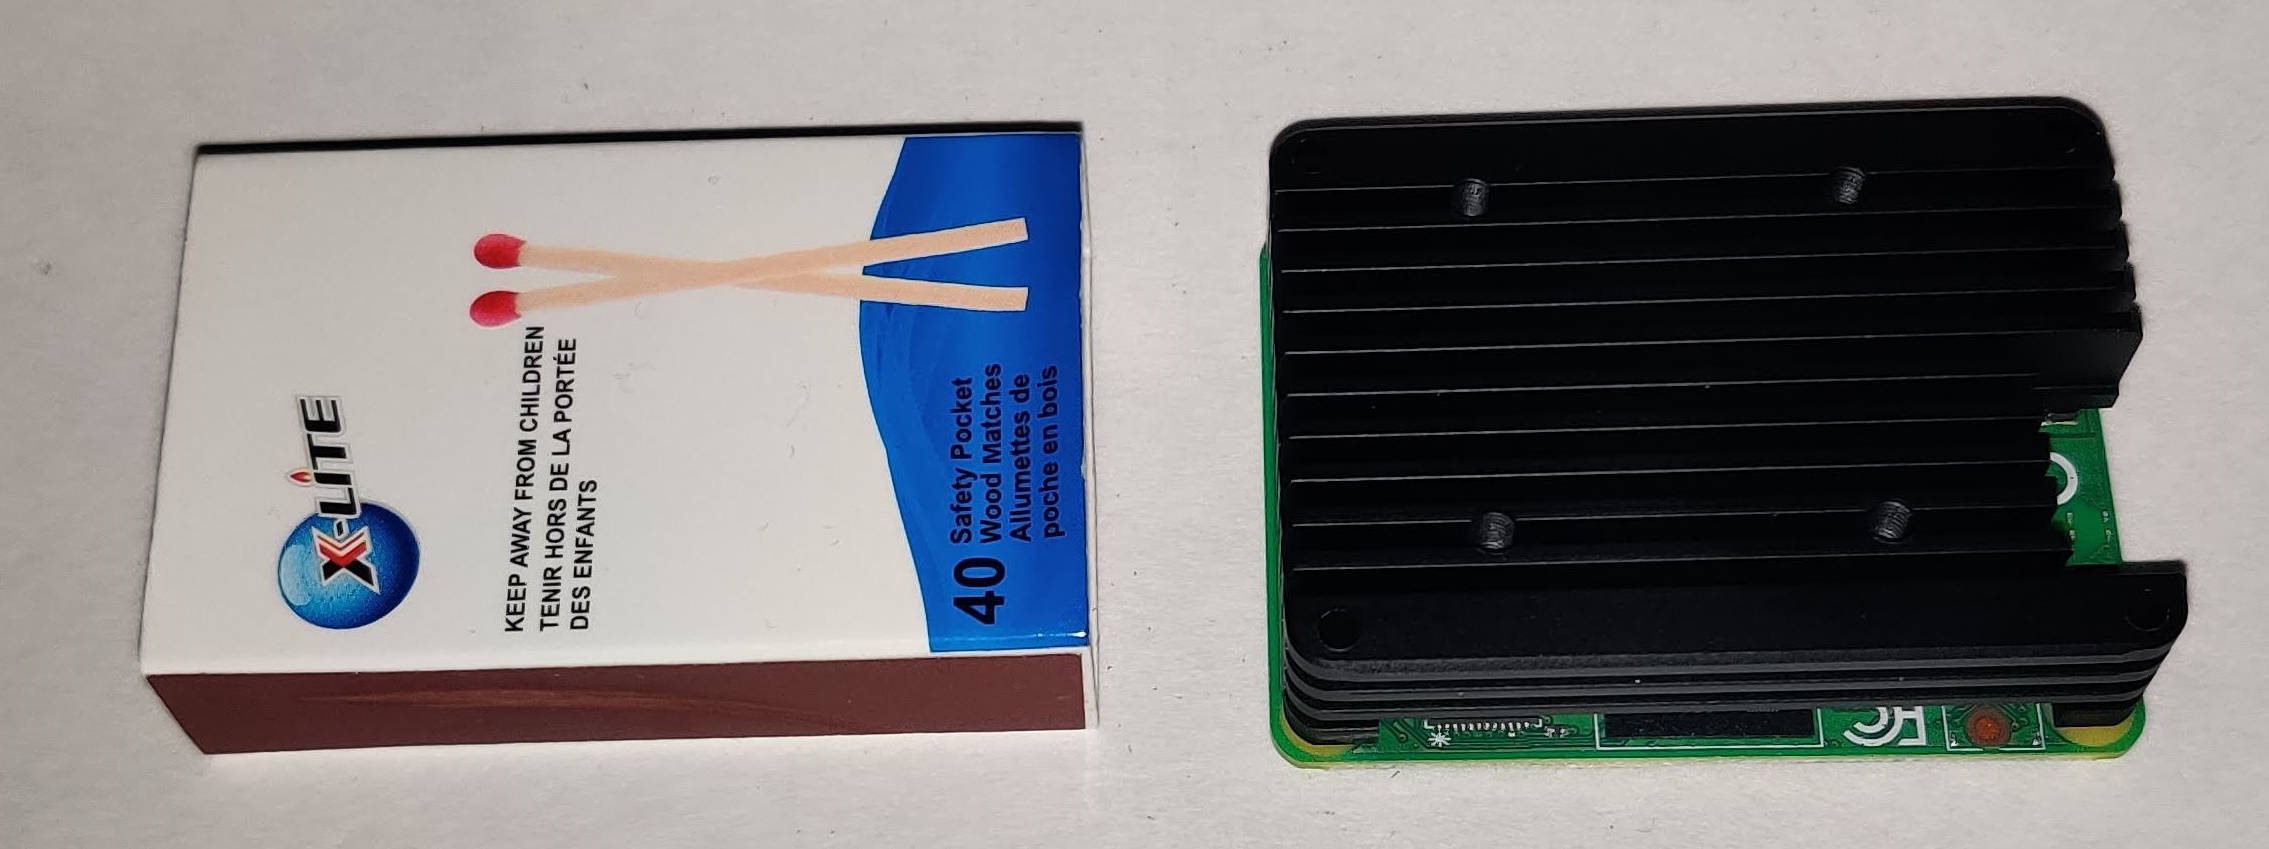 12mm Aluminum Alloy Heatsink (C235) on top of a Raspberry Pi Compute Module 4 with matchbox for comparison